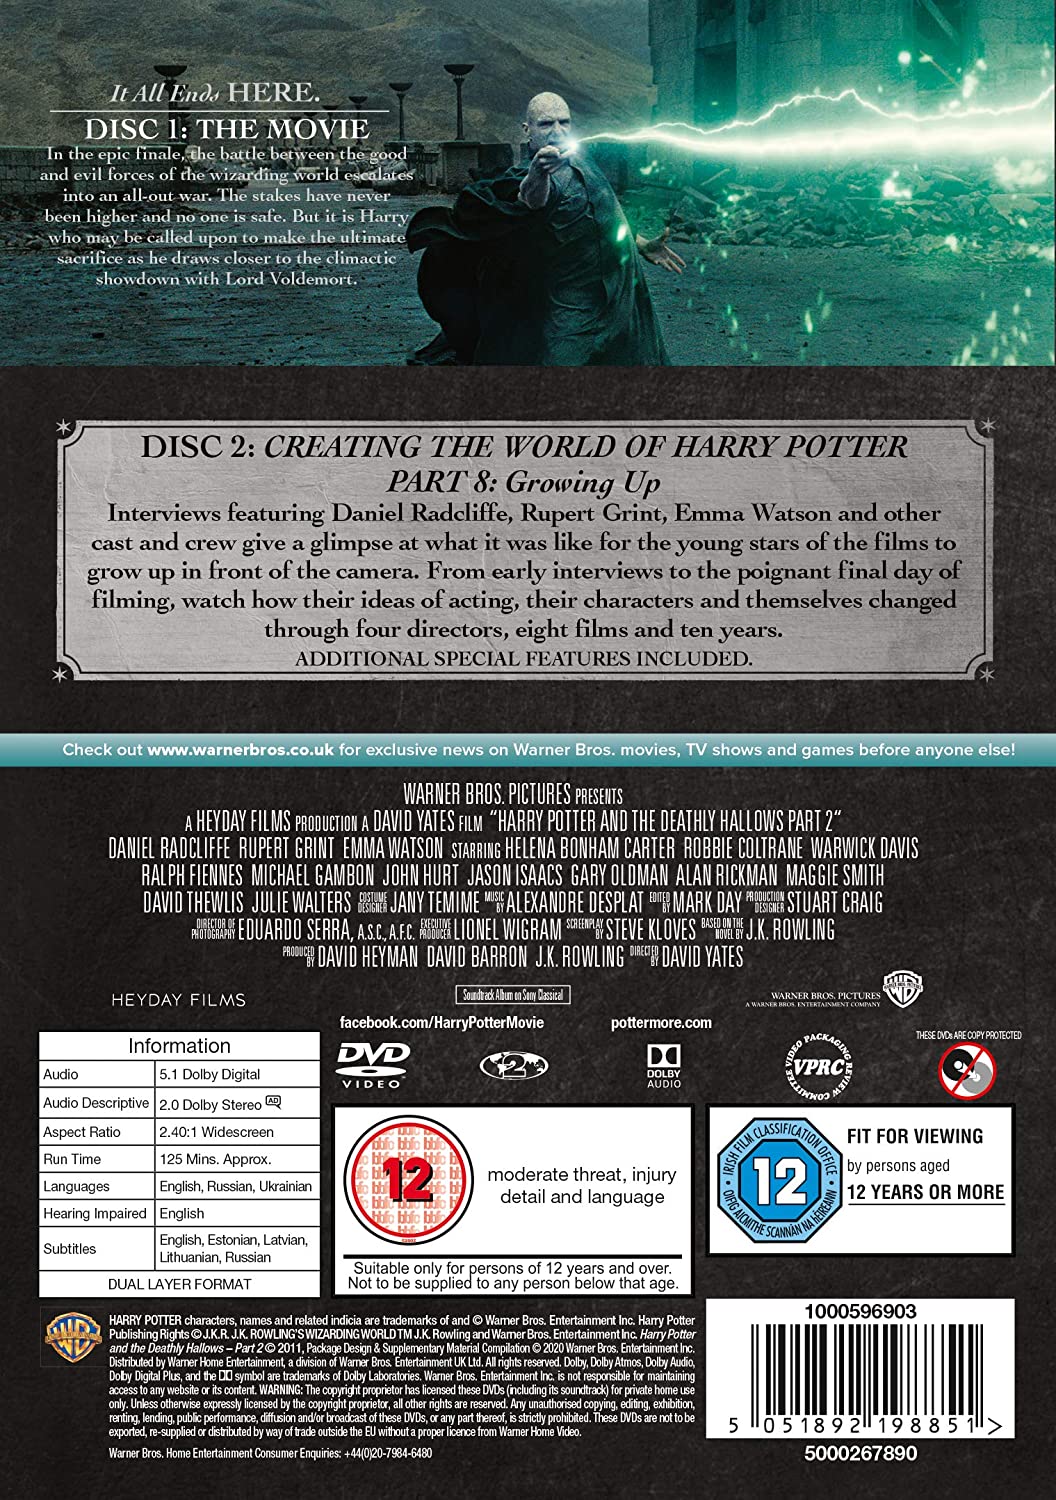 Harry Potter and the Deathly Hallows - Part 2 [Year 7] [2016 Edition 2 Disk] [2011] - Fantasy/Family [DVD]